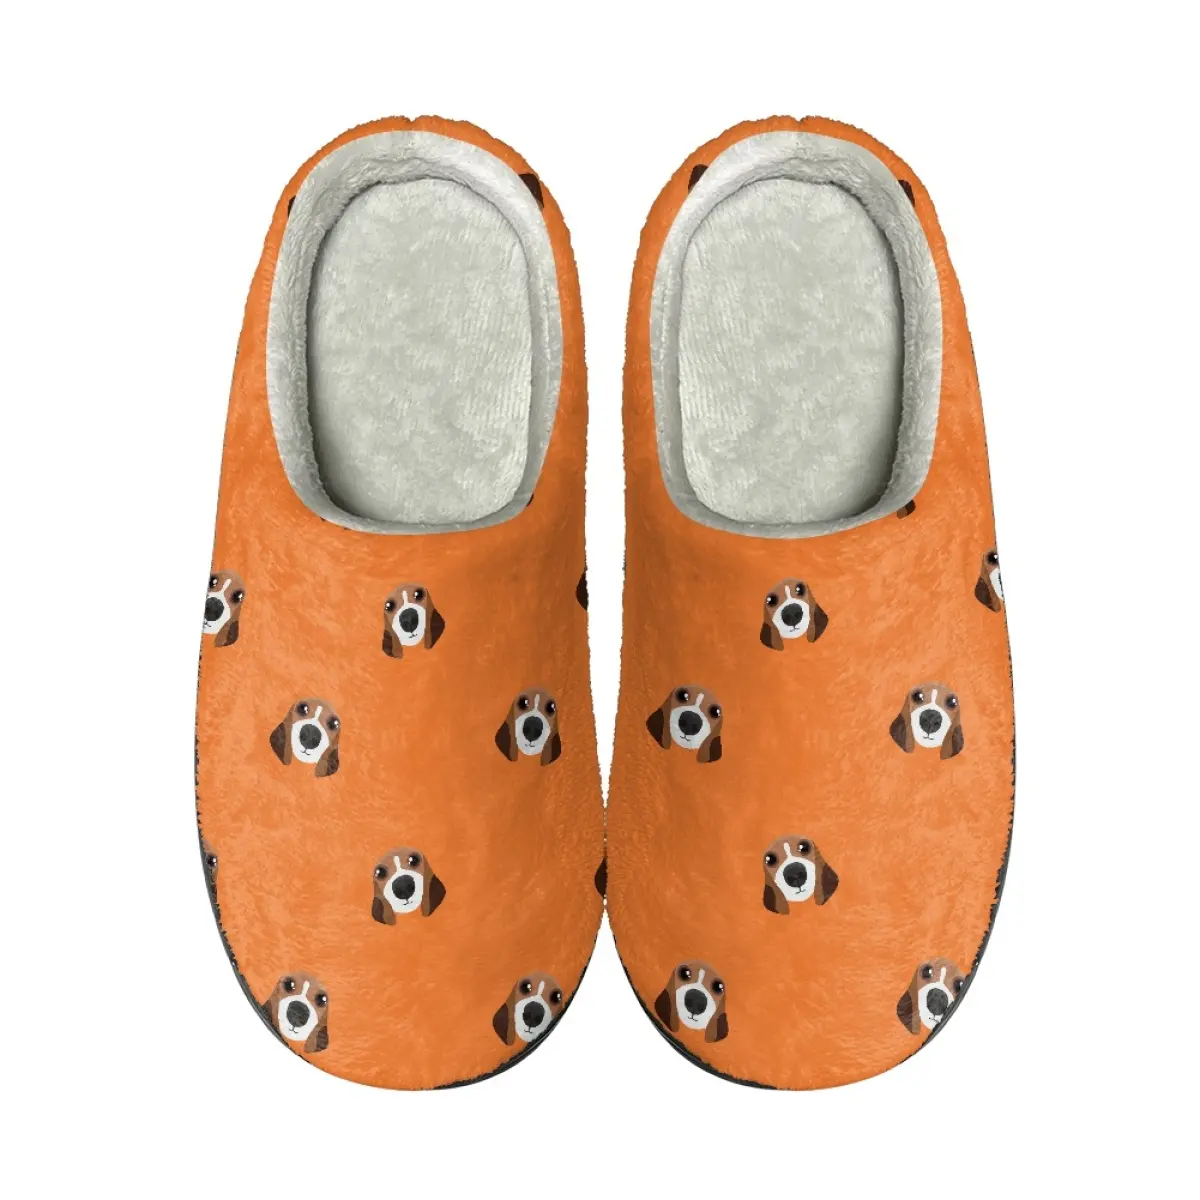 Hot Selling Home Slippers For Women Orange Cute Dog Pattern Design Winter Slippers For Women High Quality Winter Slippers